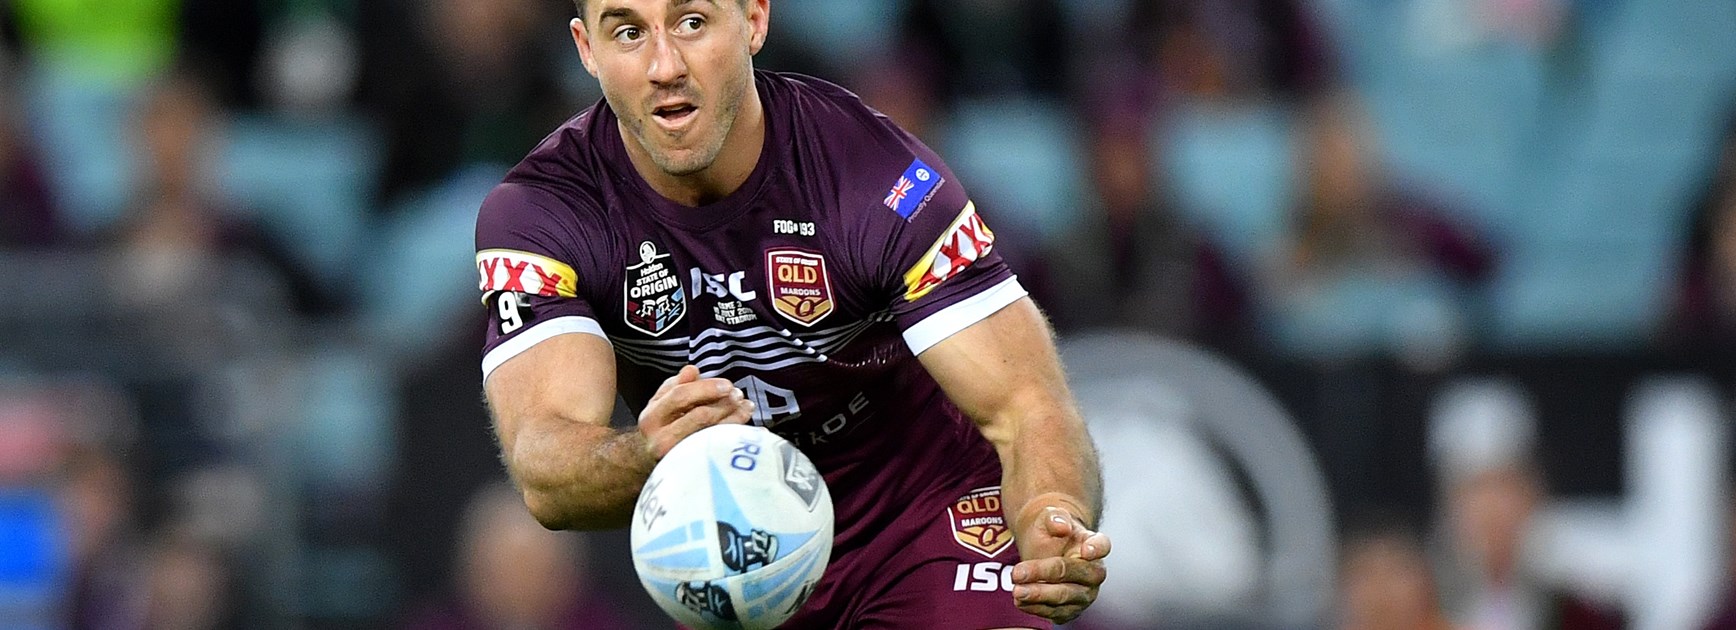 Several new faces in Maroons 2020 squad